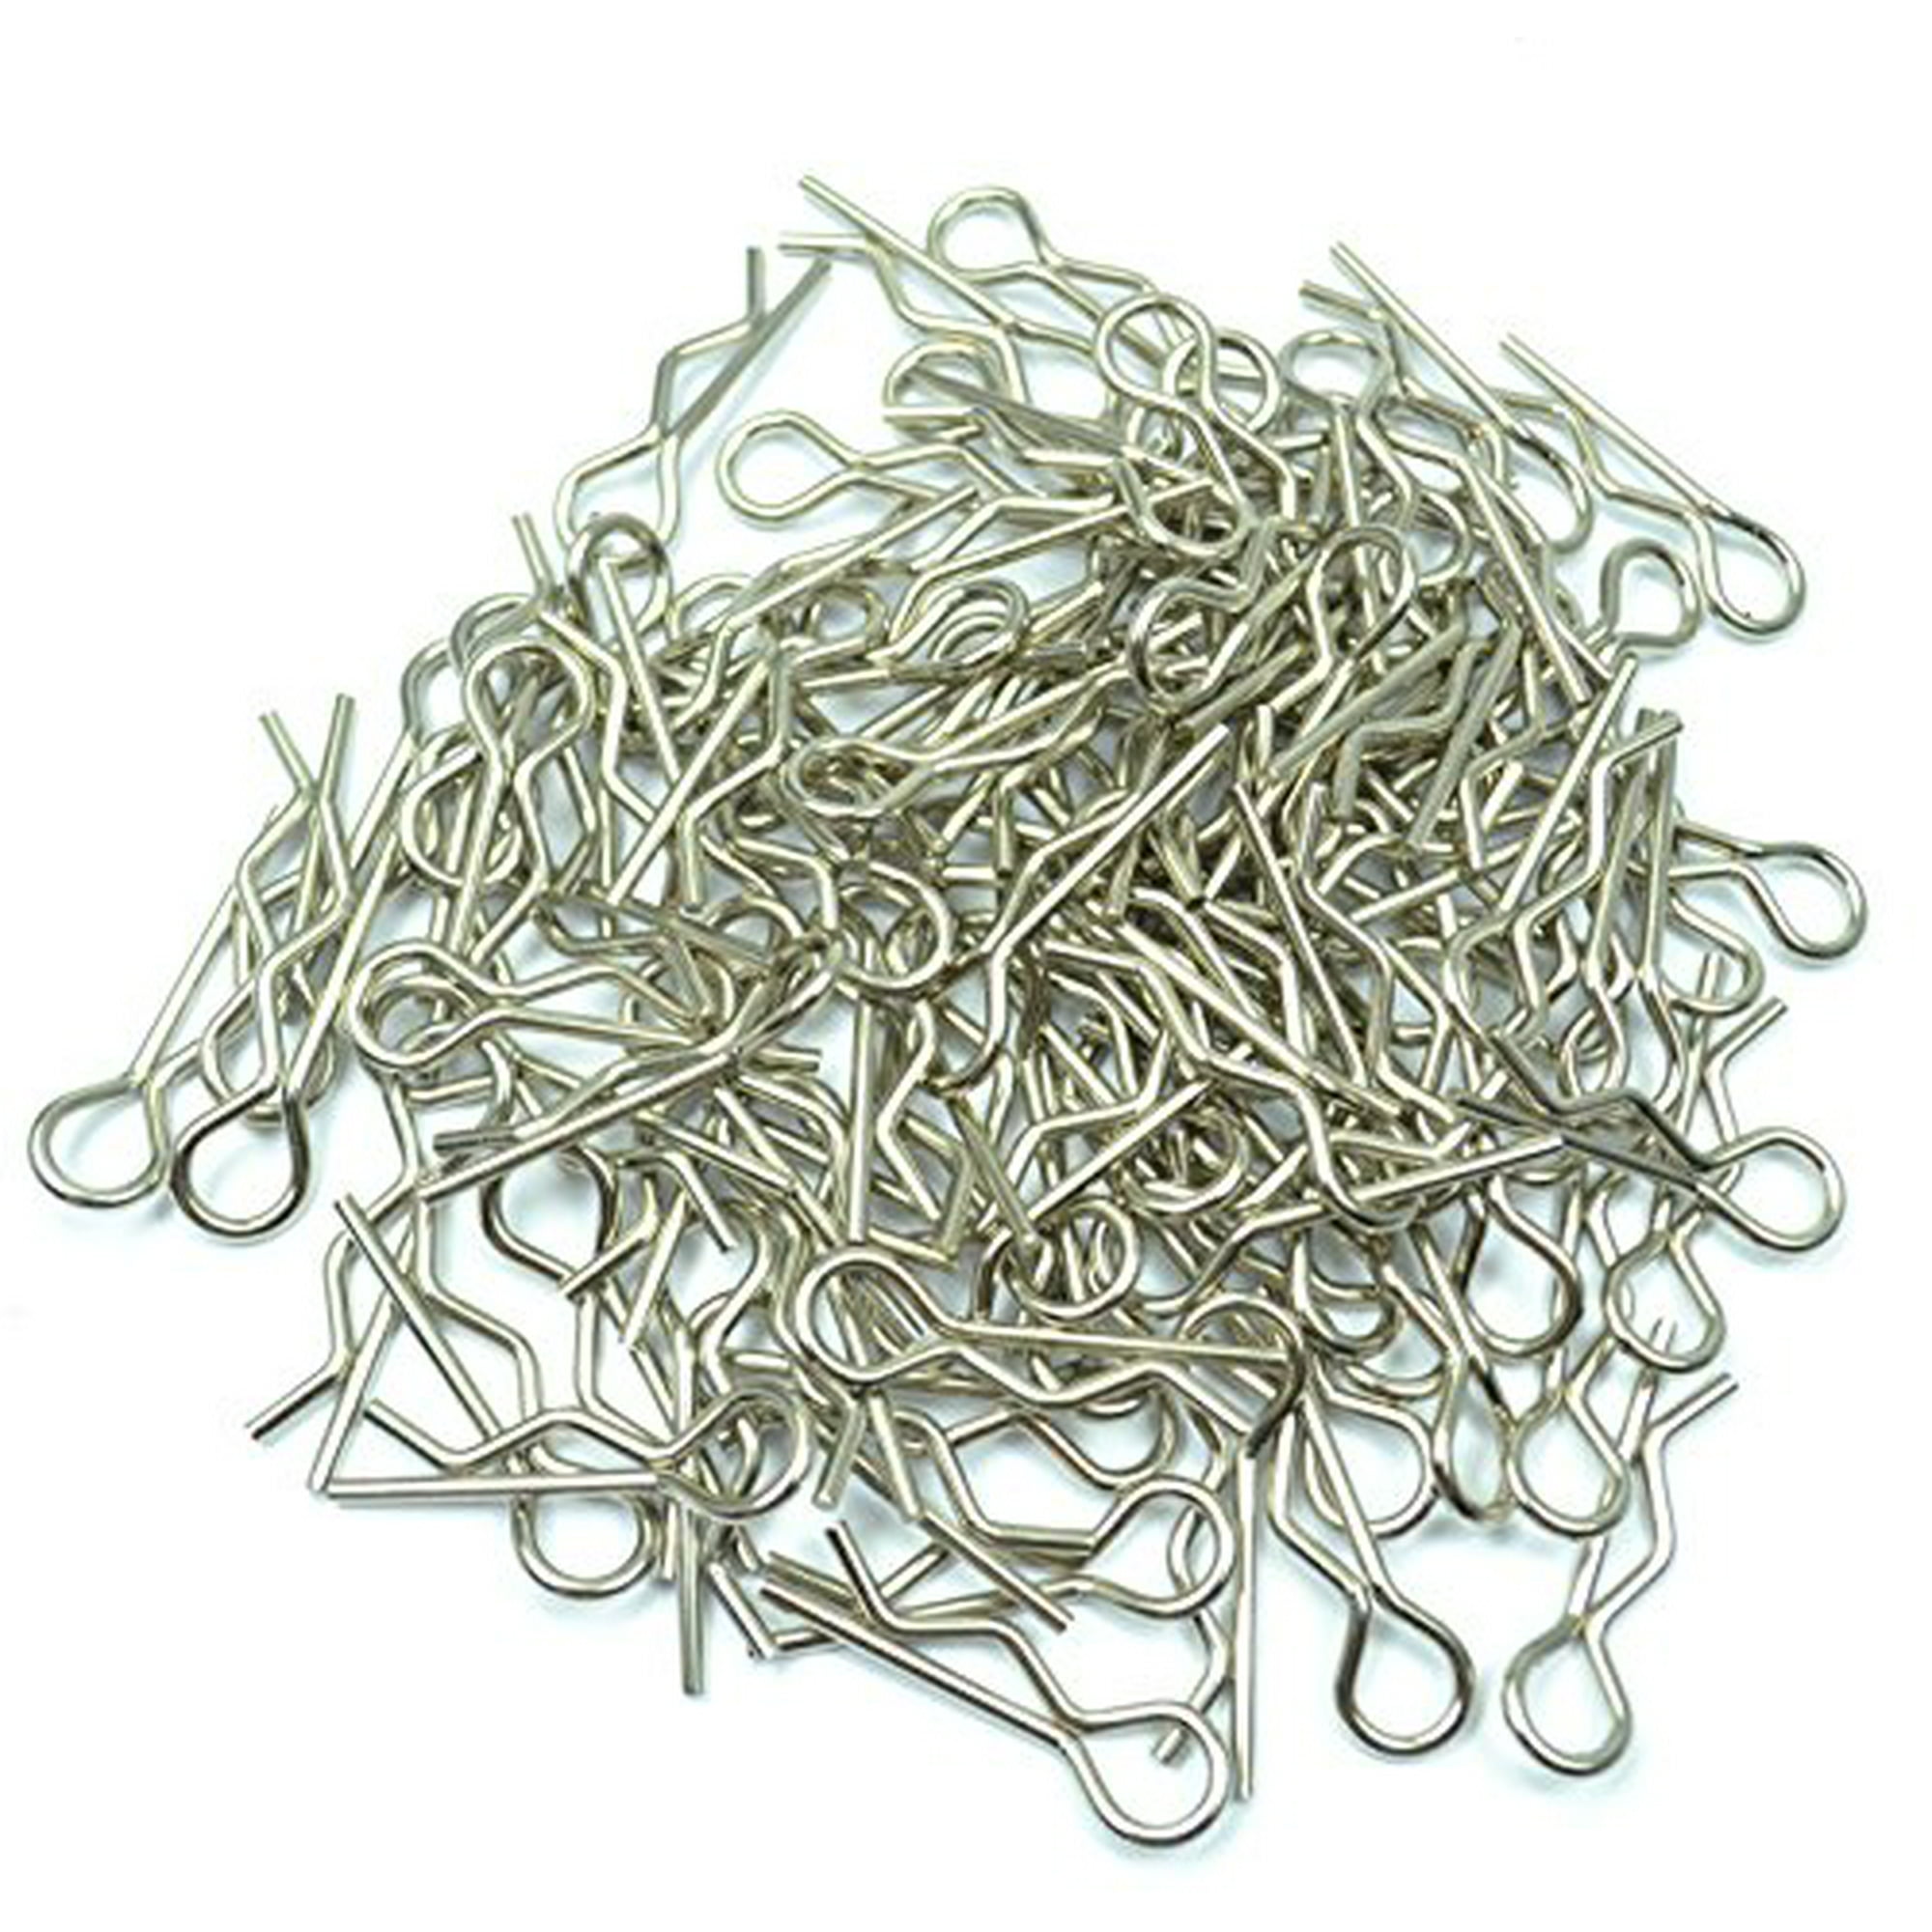 Details about   100PCS RC 1/8 Body Clips Pins Bend Post Remote Control Car Parts Truck Buggy